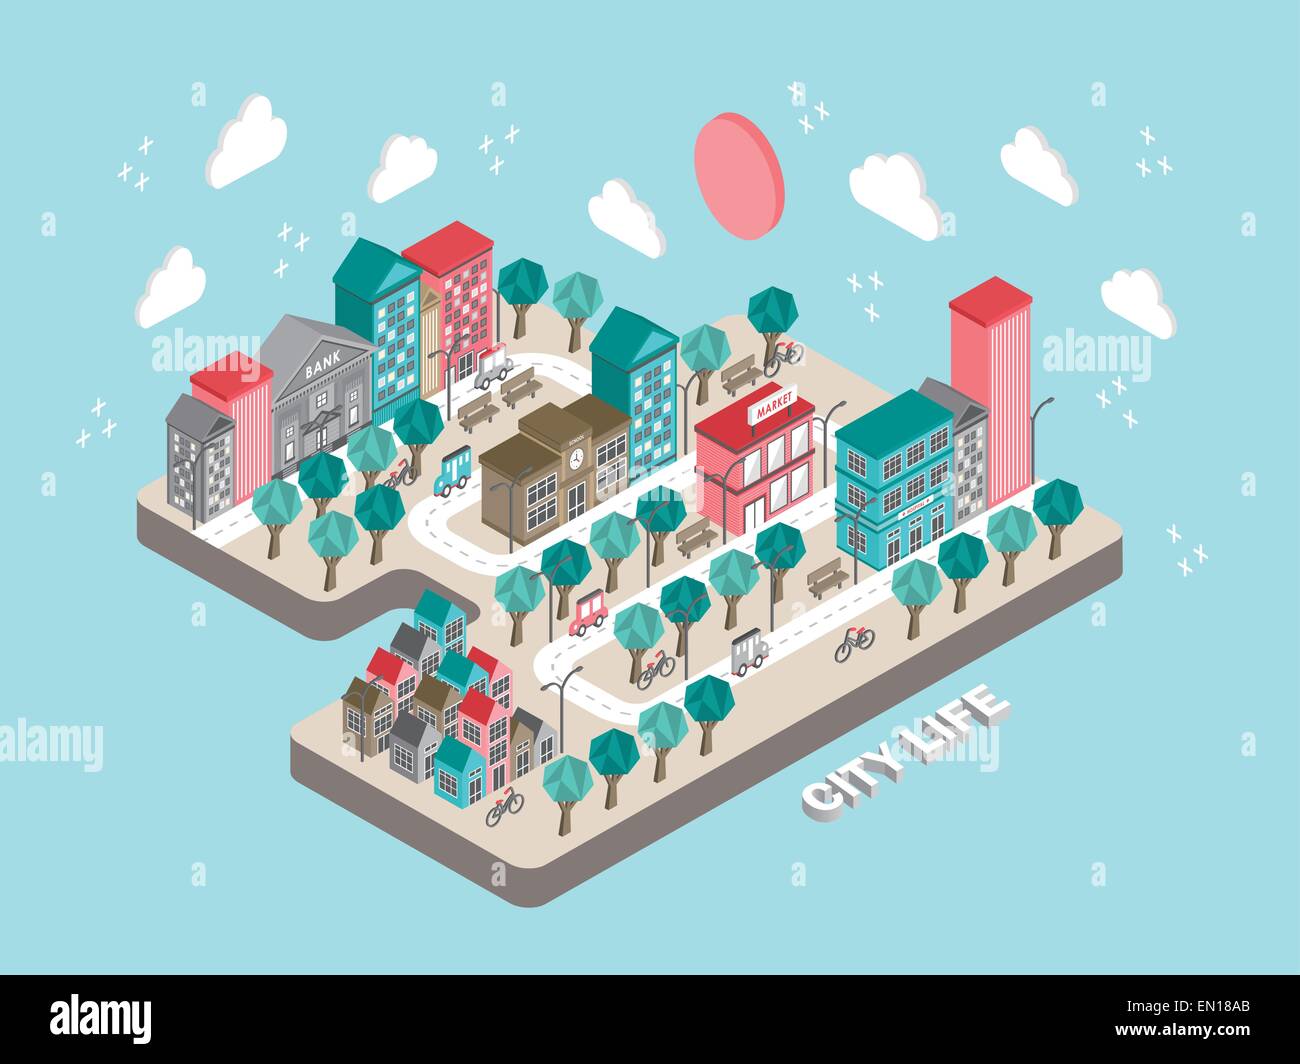 flat 3d isometric city life concept illustration over blue background Stock Vector